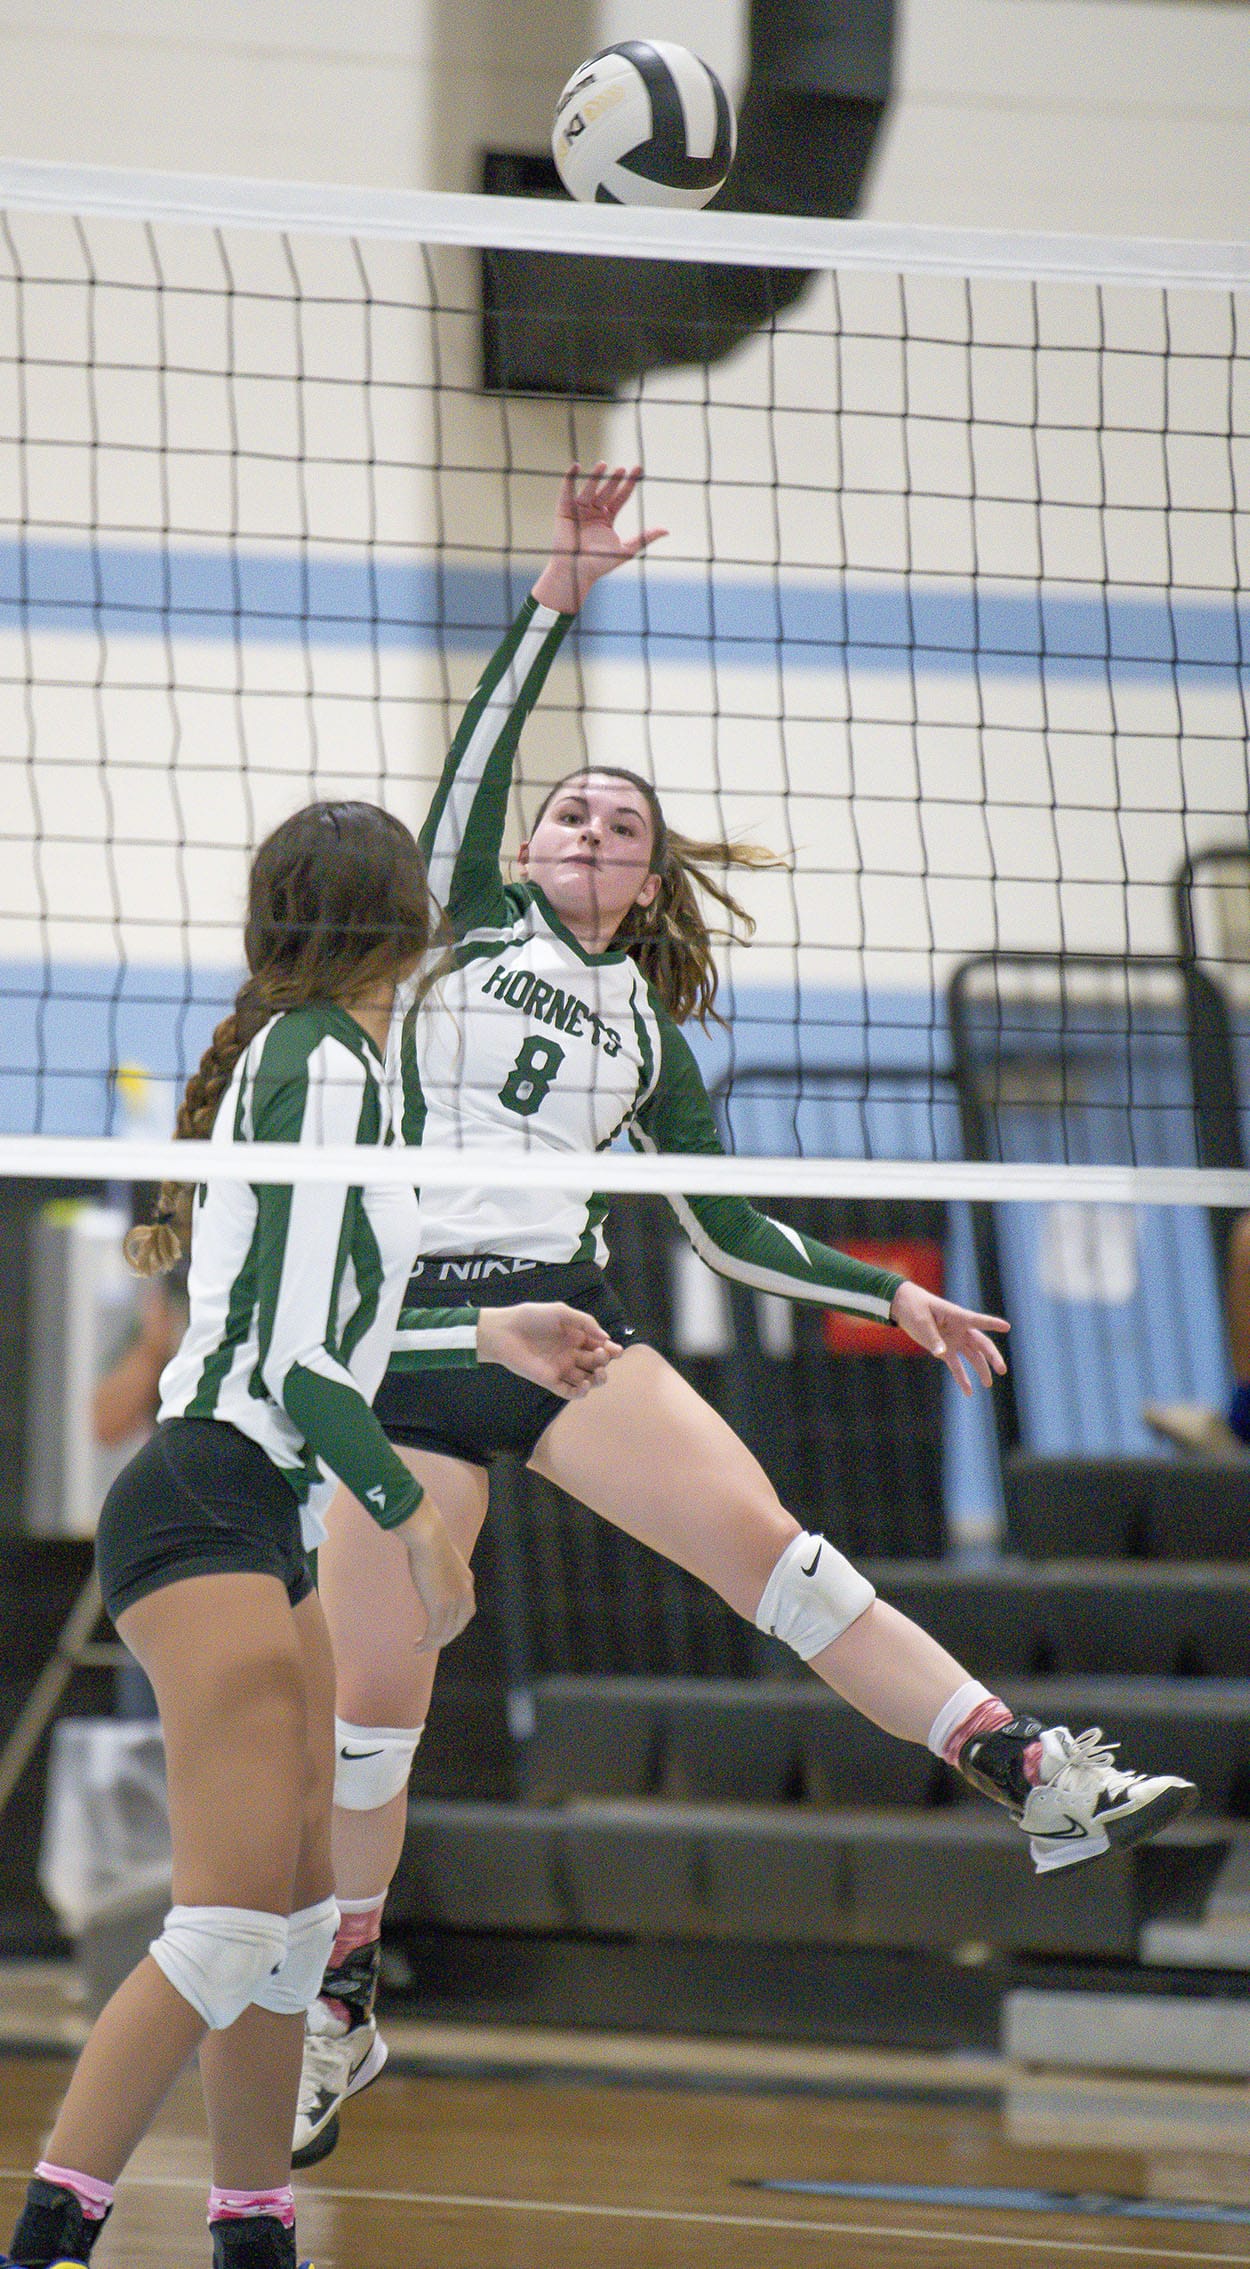 Weeki Wachee, 8,Morgan Maeder saves a volley against Anclote High during the 4A district 9 championship match. Weeki Wachee took the Championship in four games. Photo by JOE DiCRISTOFALO